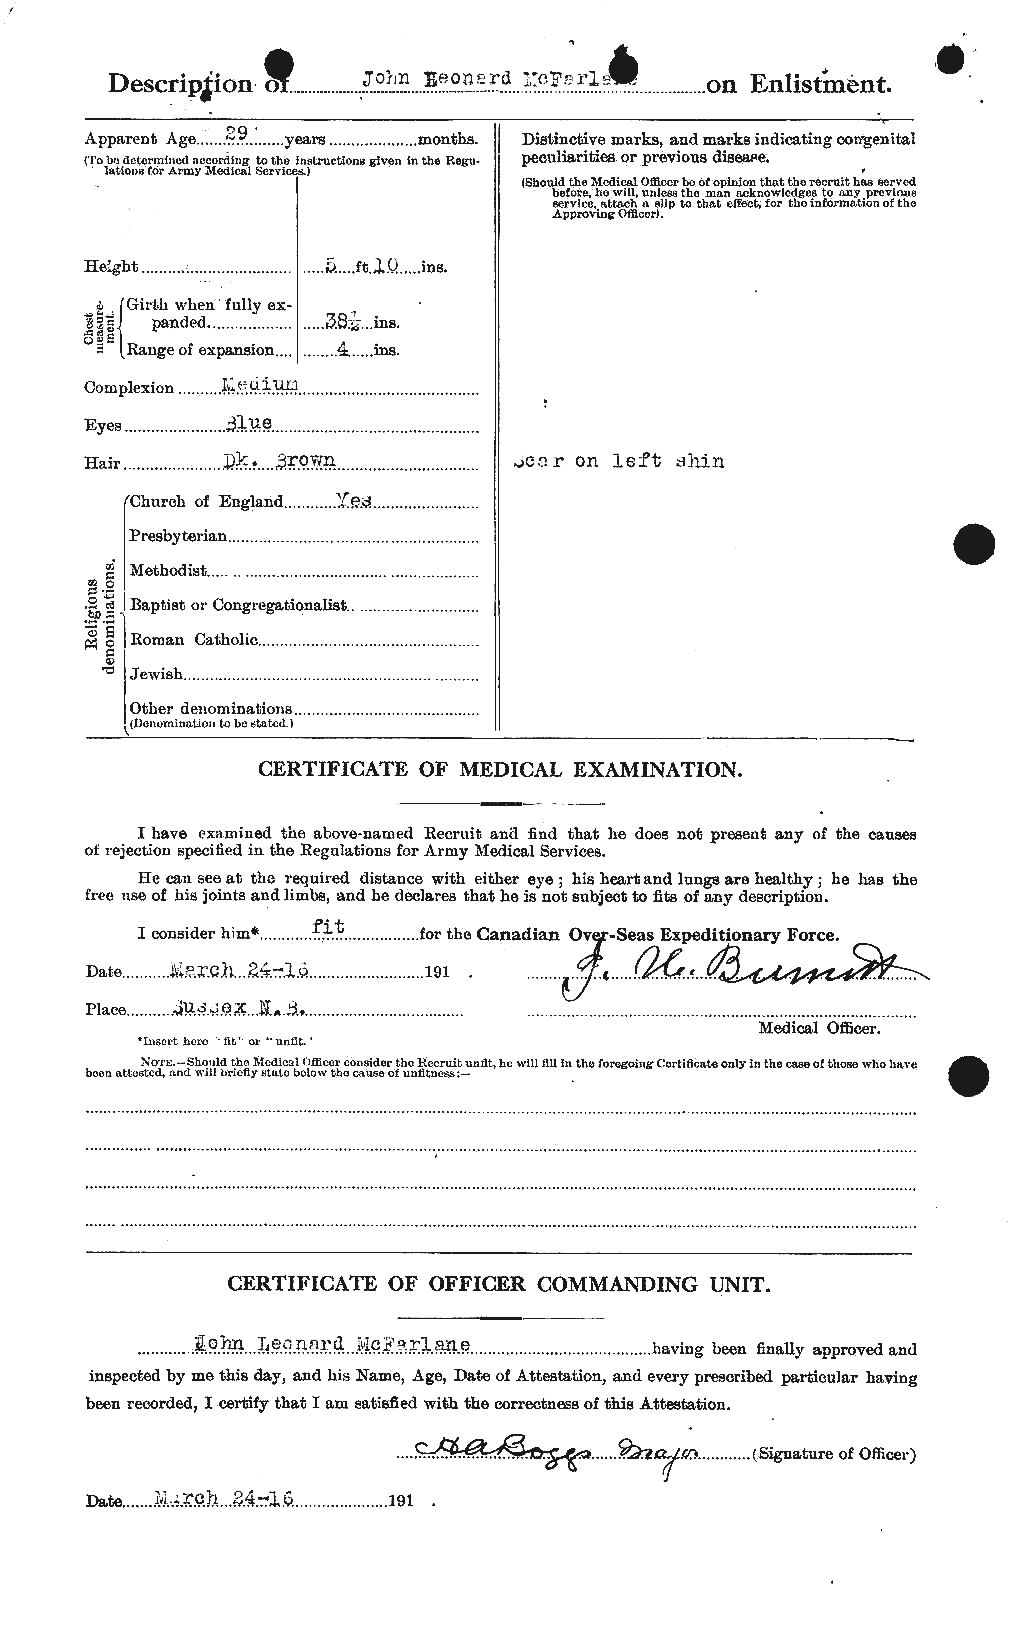 Personnel Records of the First World War - CEF 521304b